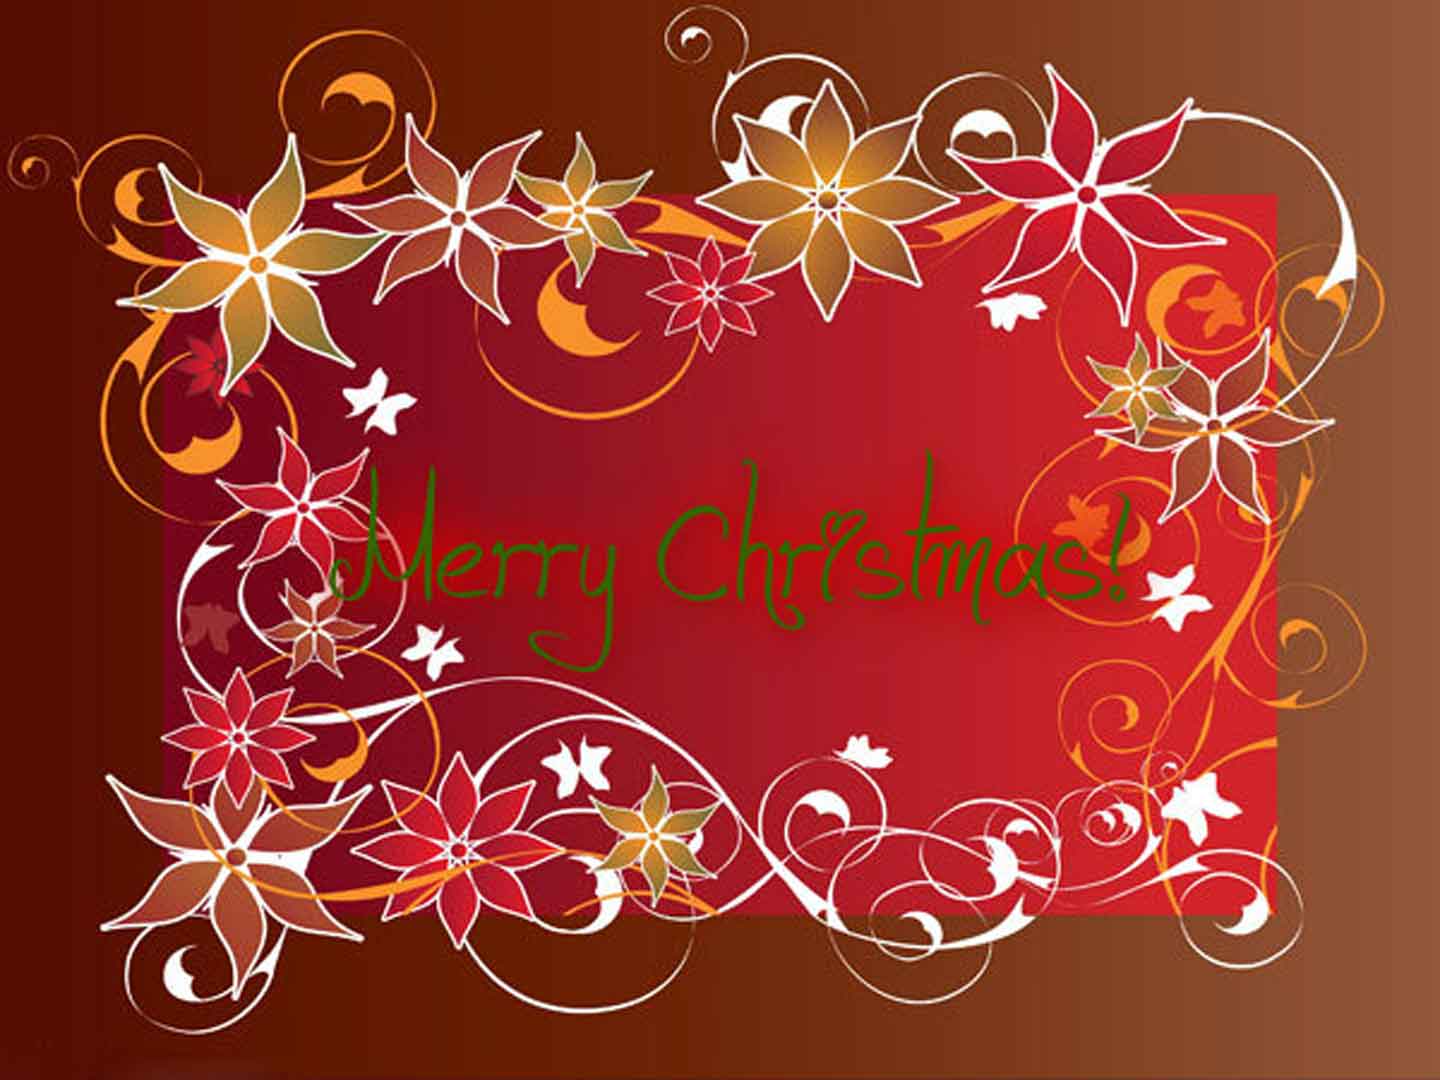 Christmas images pictures photos Wallpapers HD Christmas  Christmas pictures Christmas photos Christmas Images Christmas greeting cards christmas  